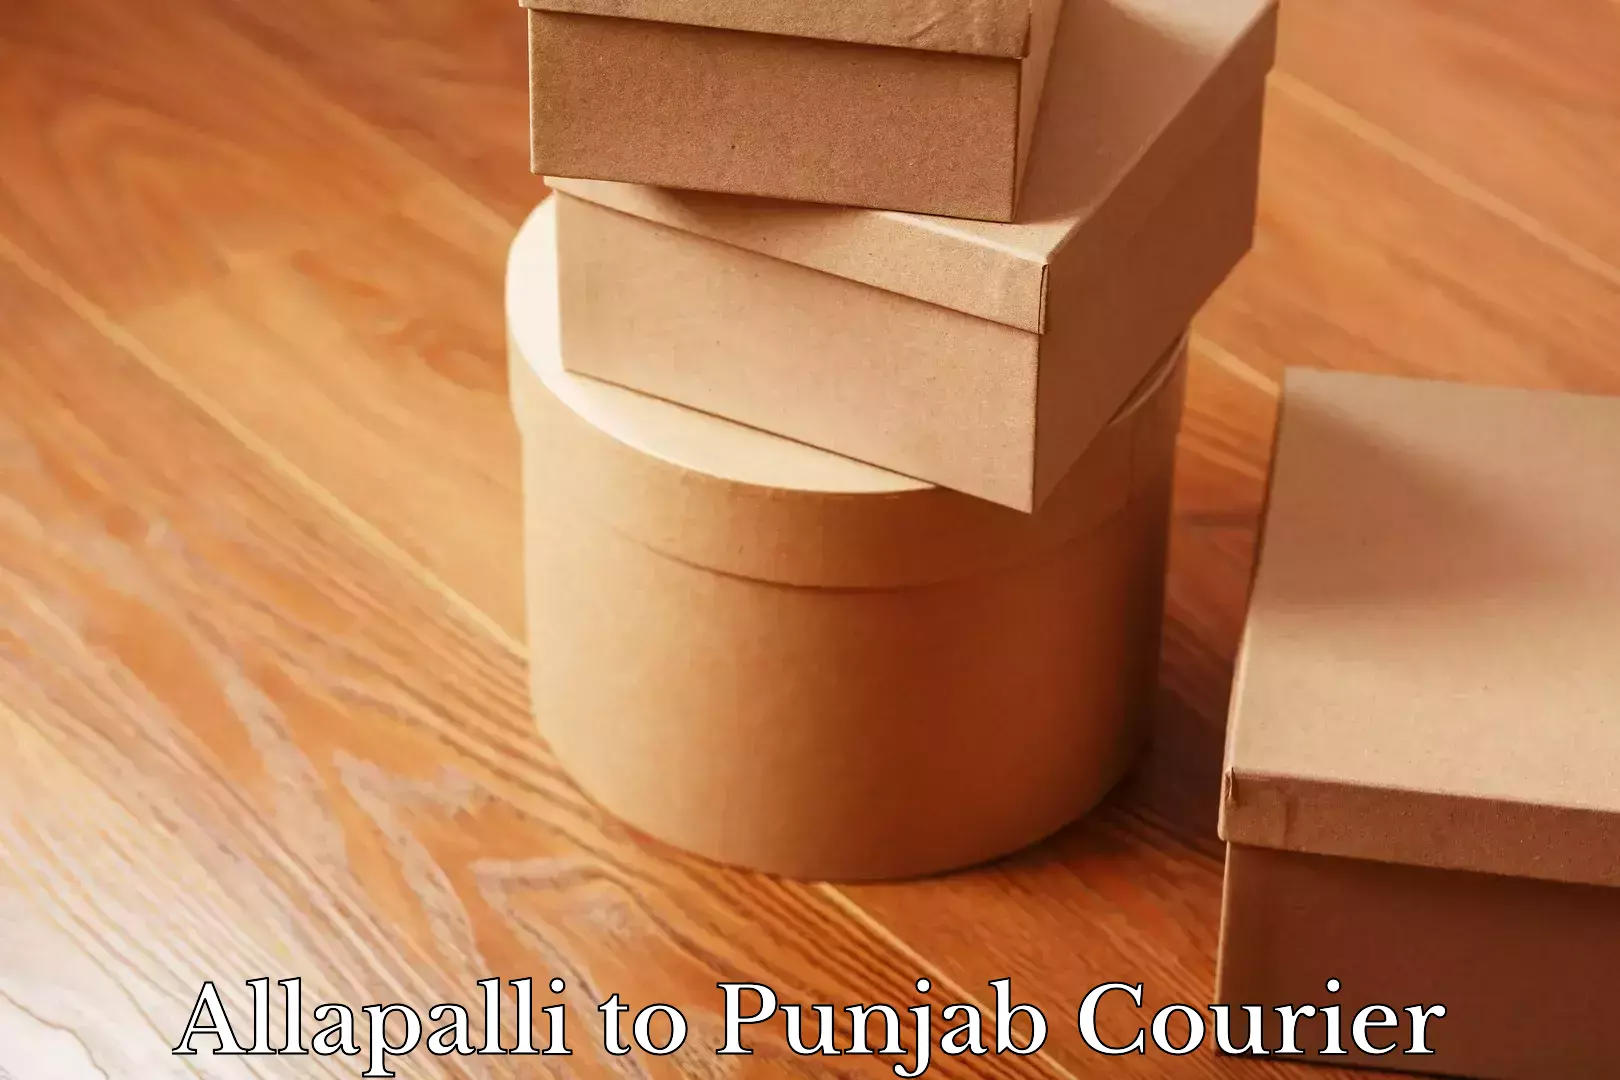 Quality courier partnerships Allapalli to Punjab